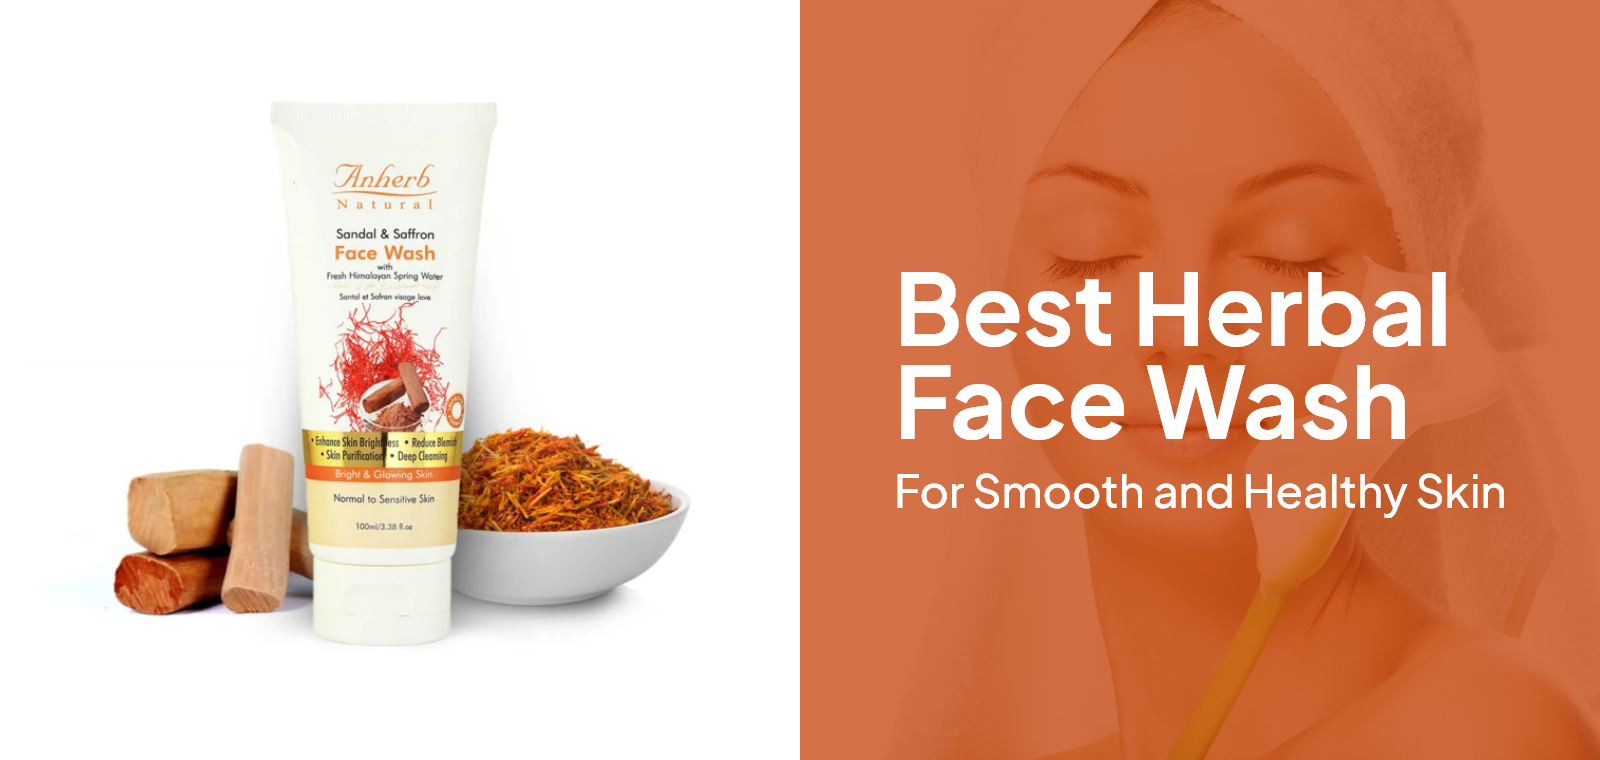 Best Herbal Face Wash For Smooth And Healthy Skin